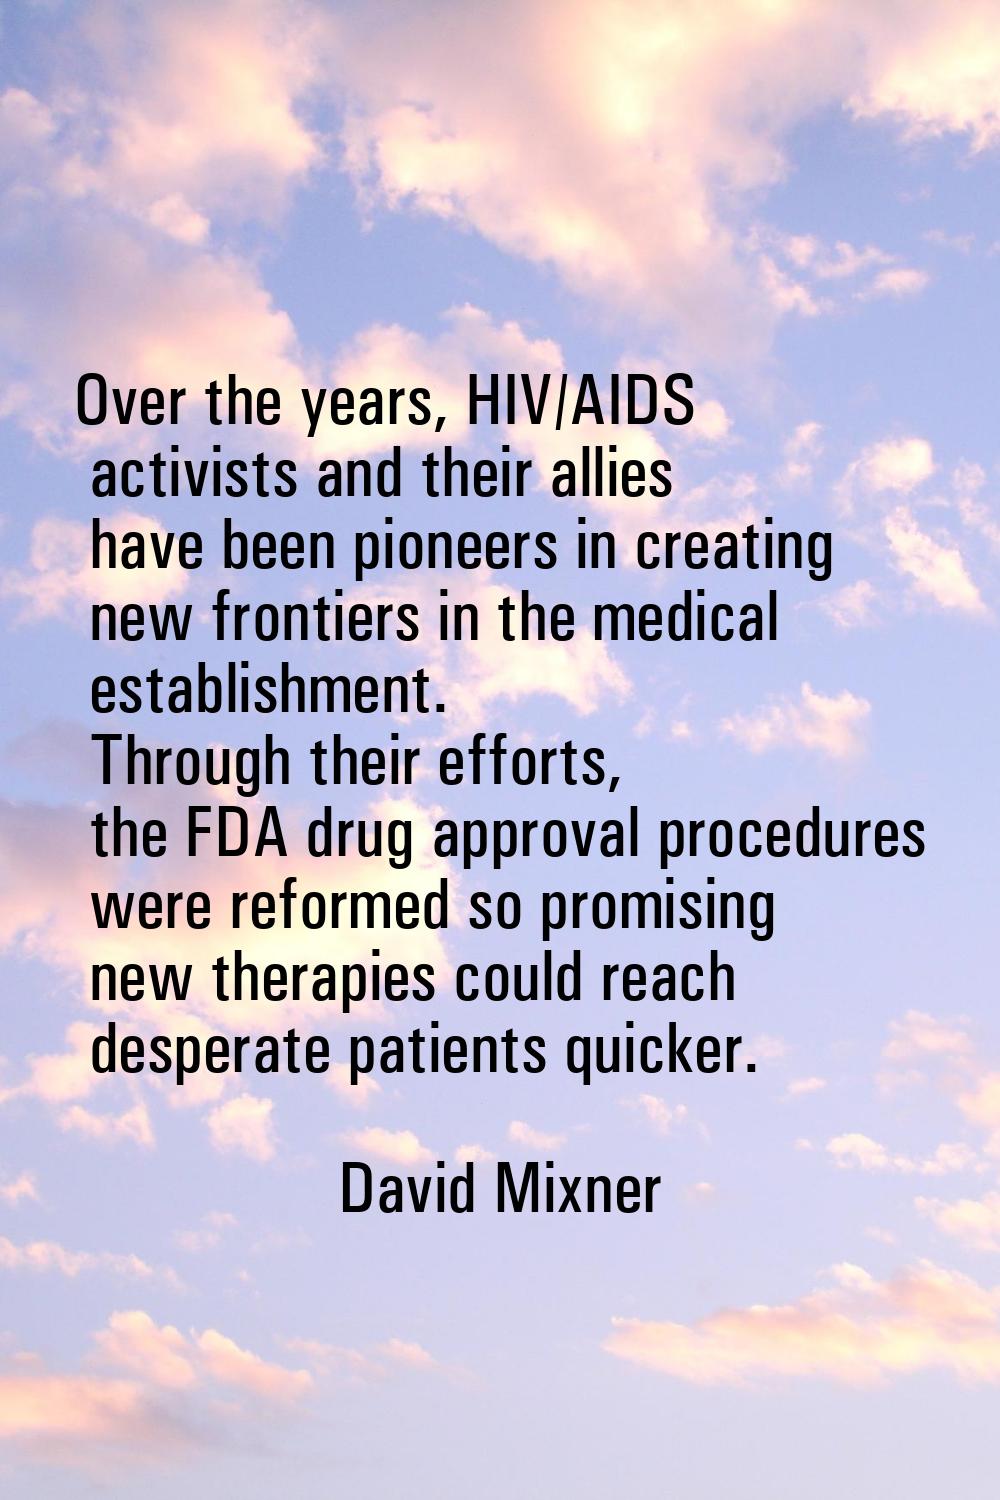 Over the years, HIV/AIDS activists and their allies have been pioneers in creating new frontiers in